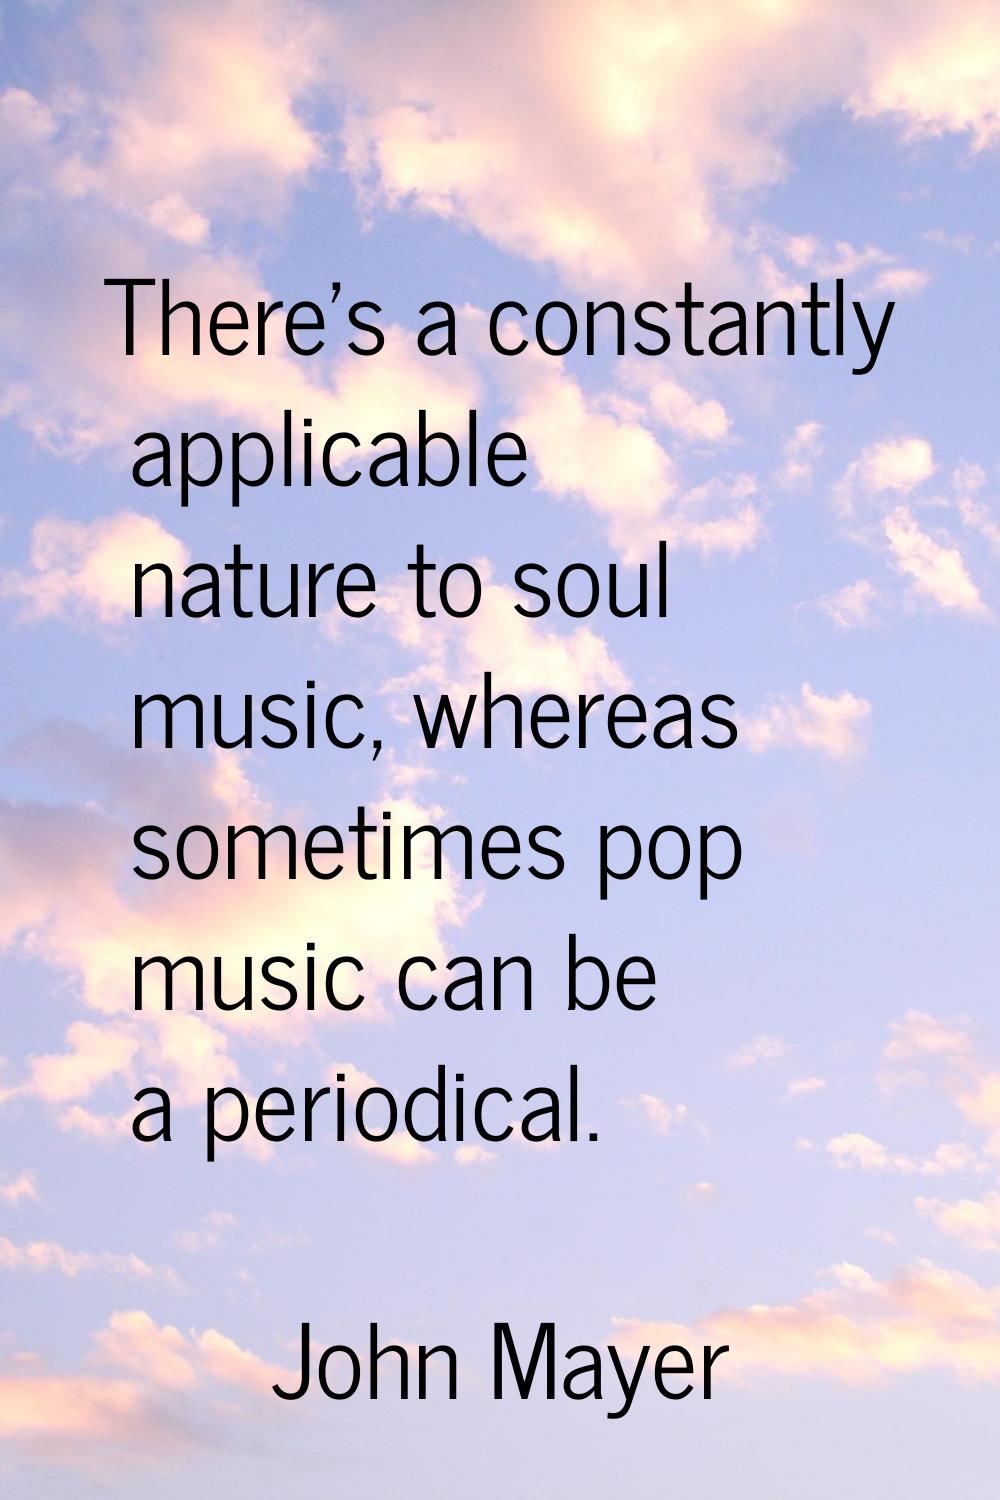 There's a constantly applicable nature to soul music, whereas sometimes pop music can be a periodic